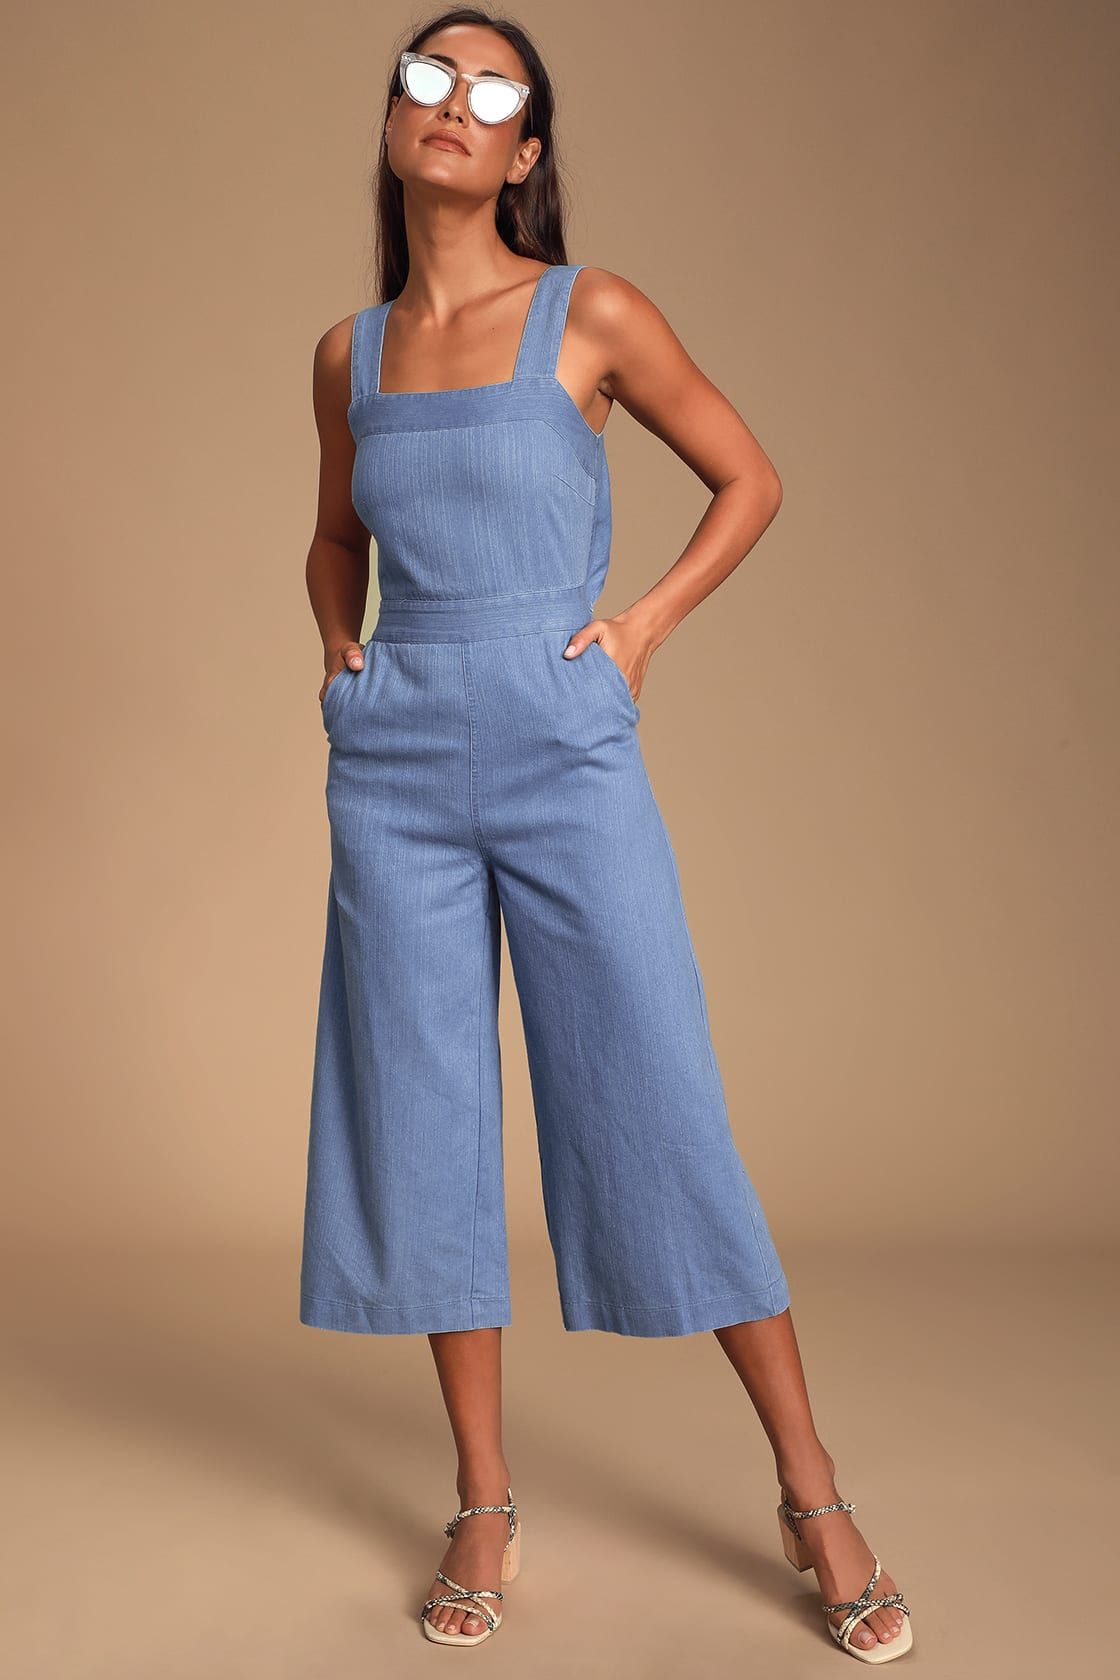 Whilo Light Blue Chambray Tie-Back Culotte Jumpsuit | Lulus